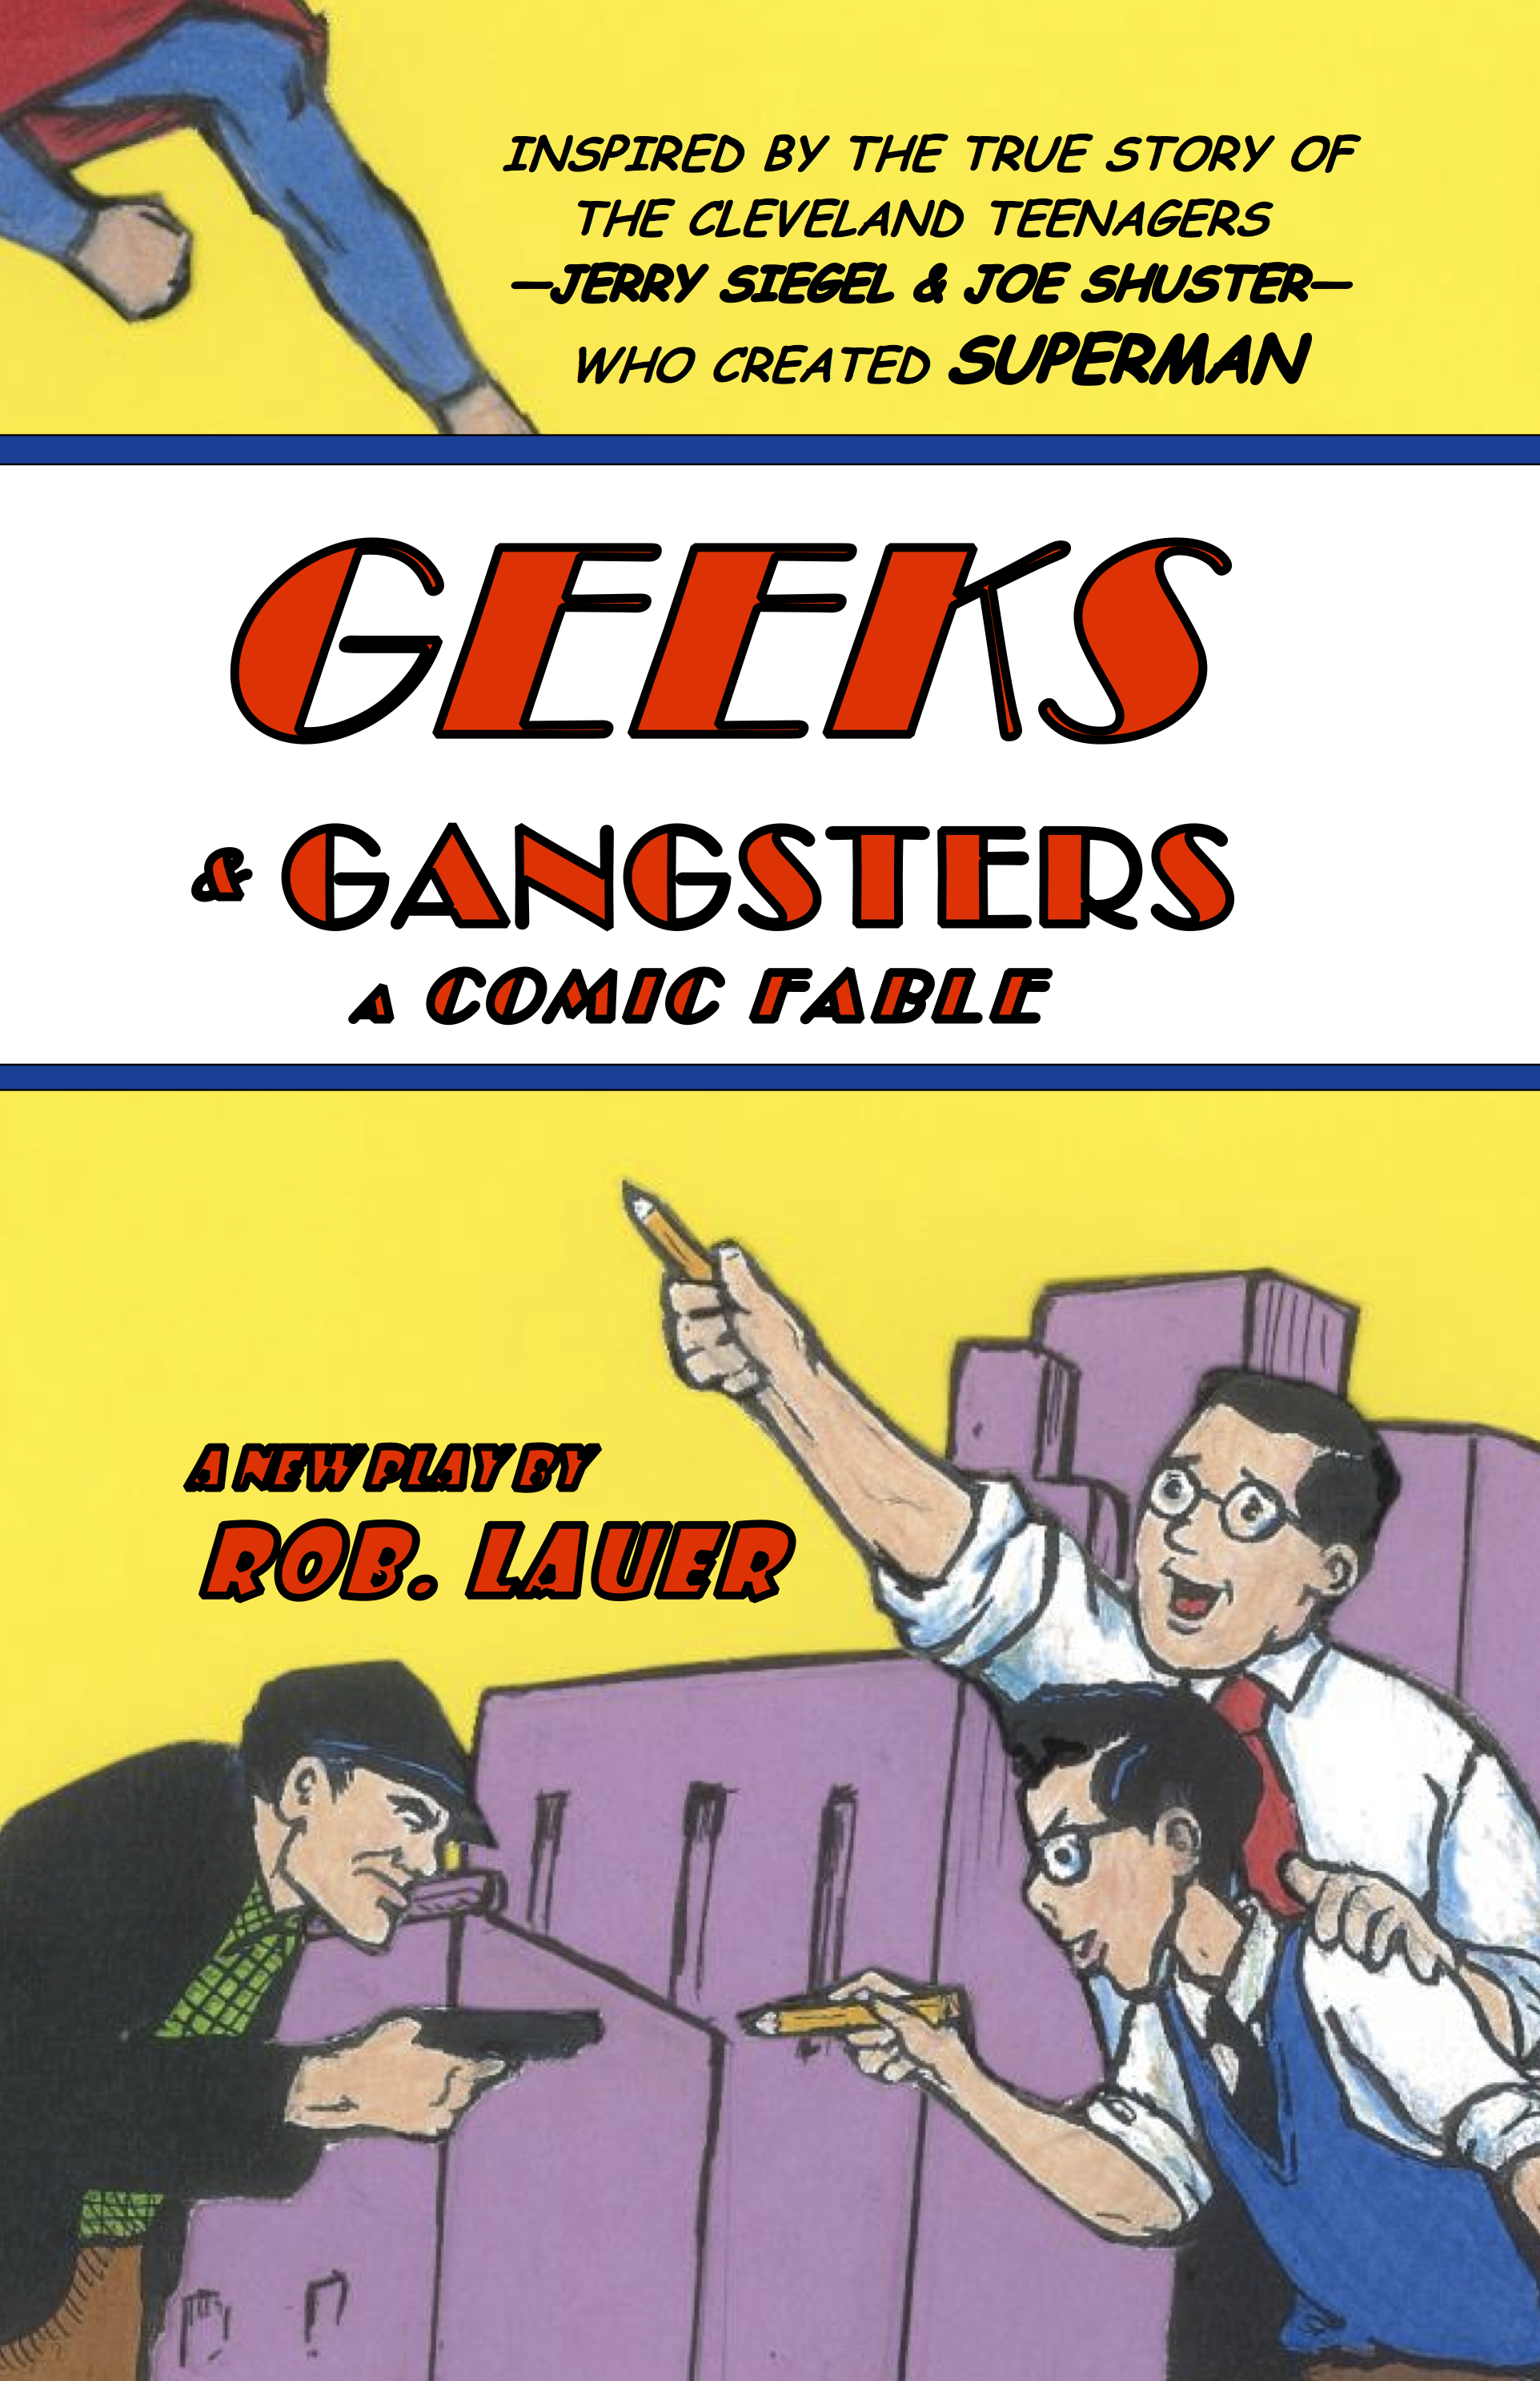 Geeks and Gangsters — A Comic Fable -Play Version